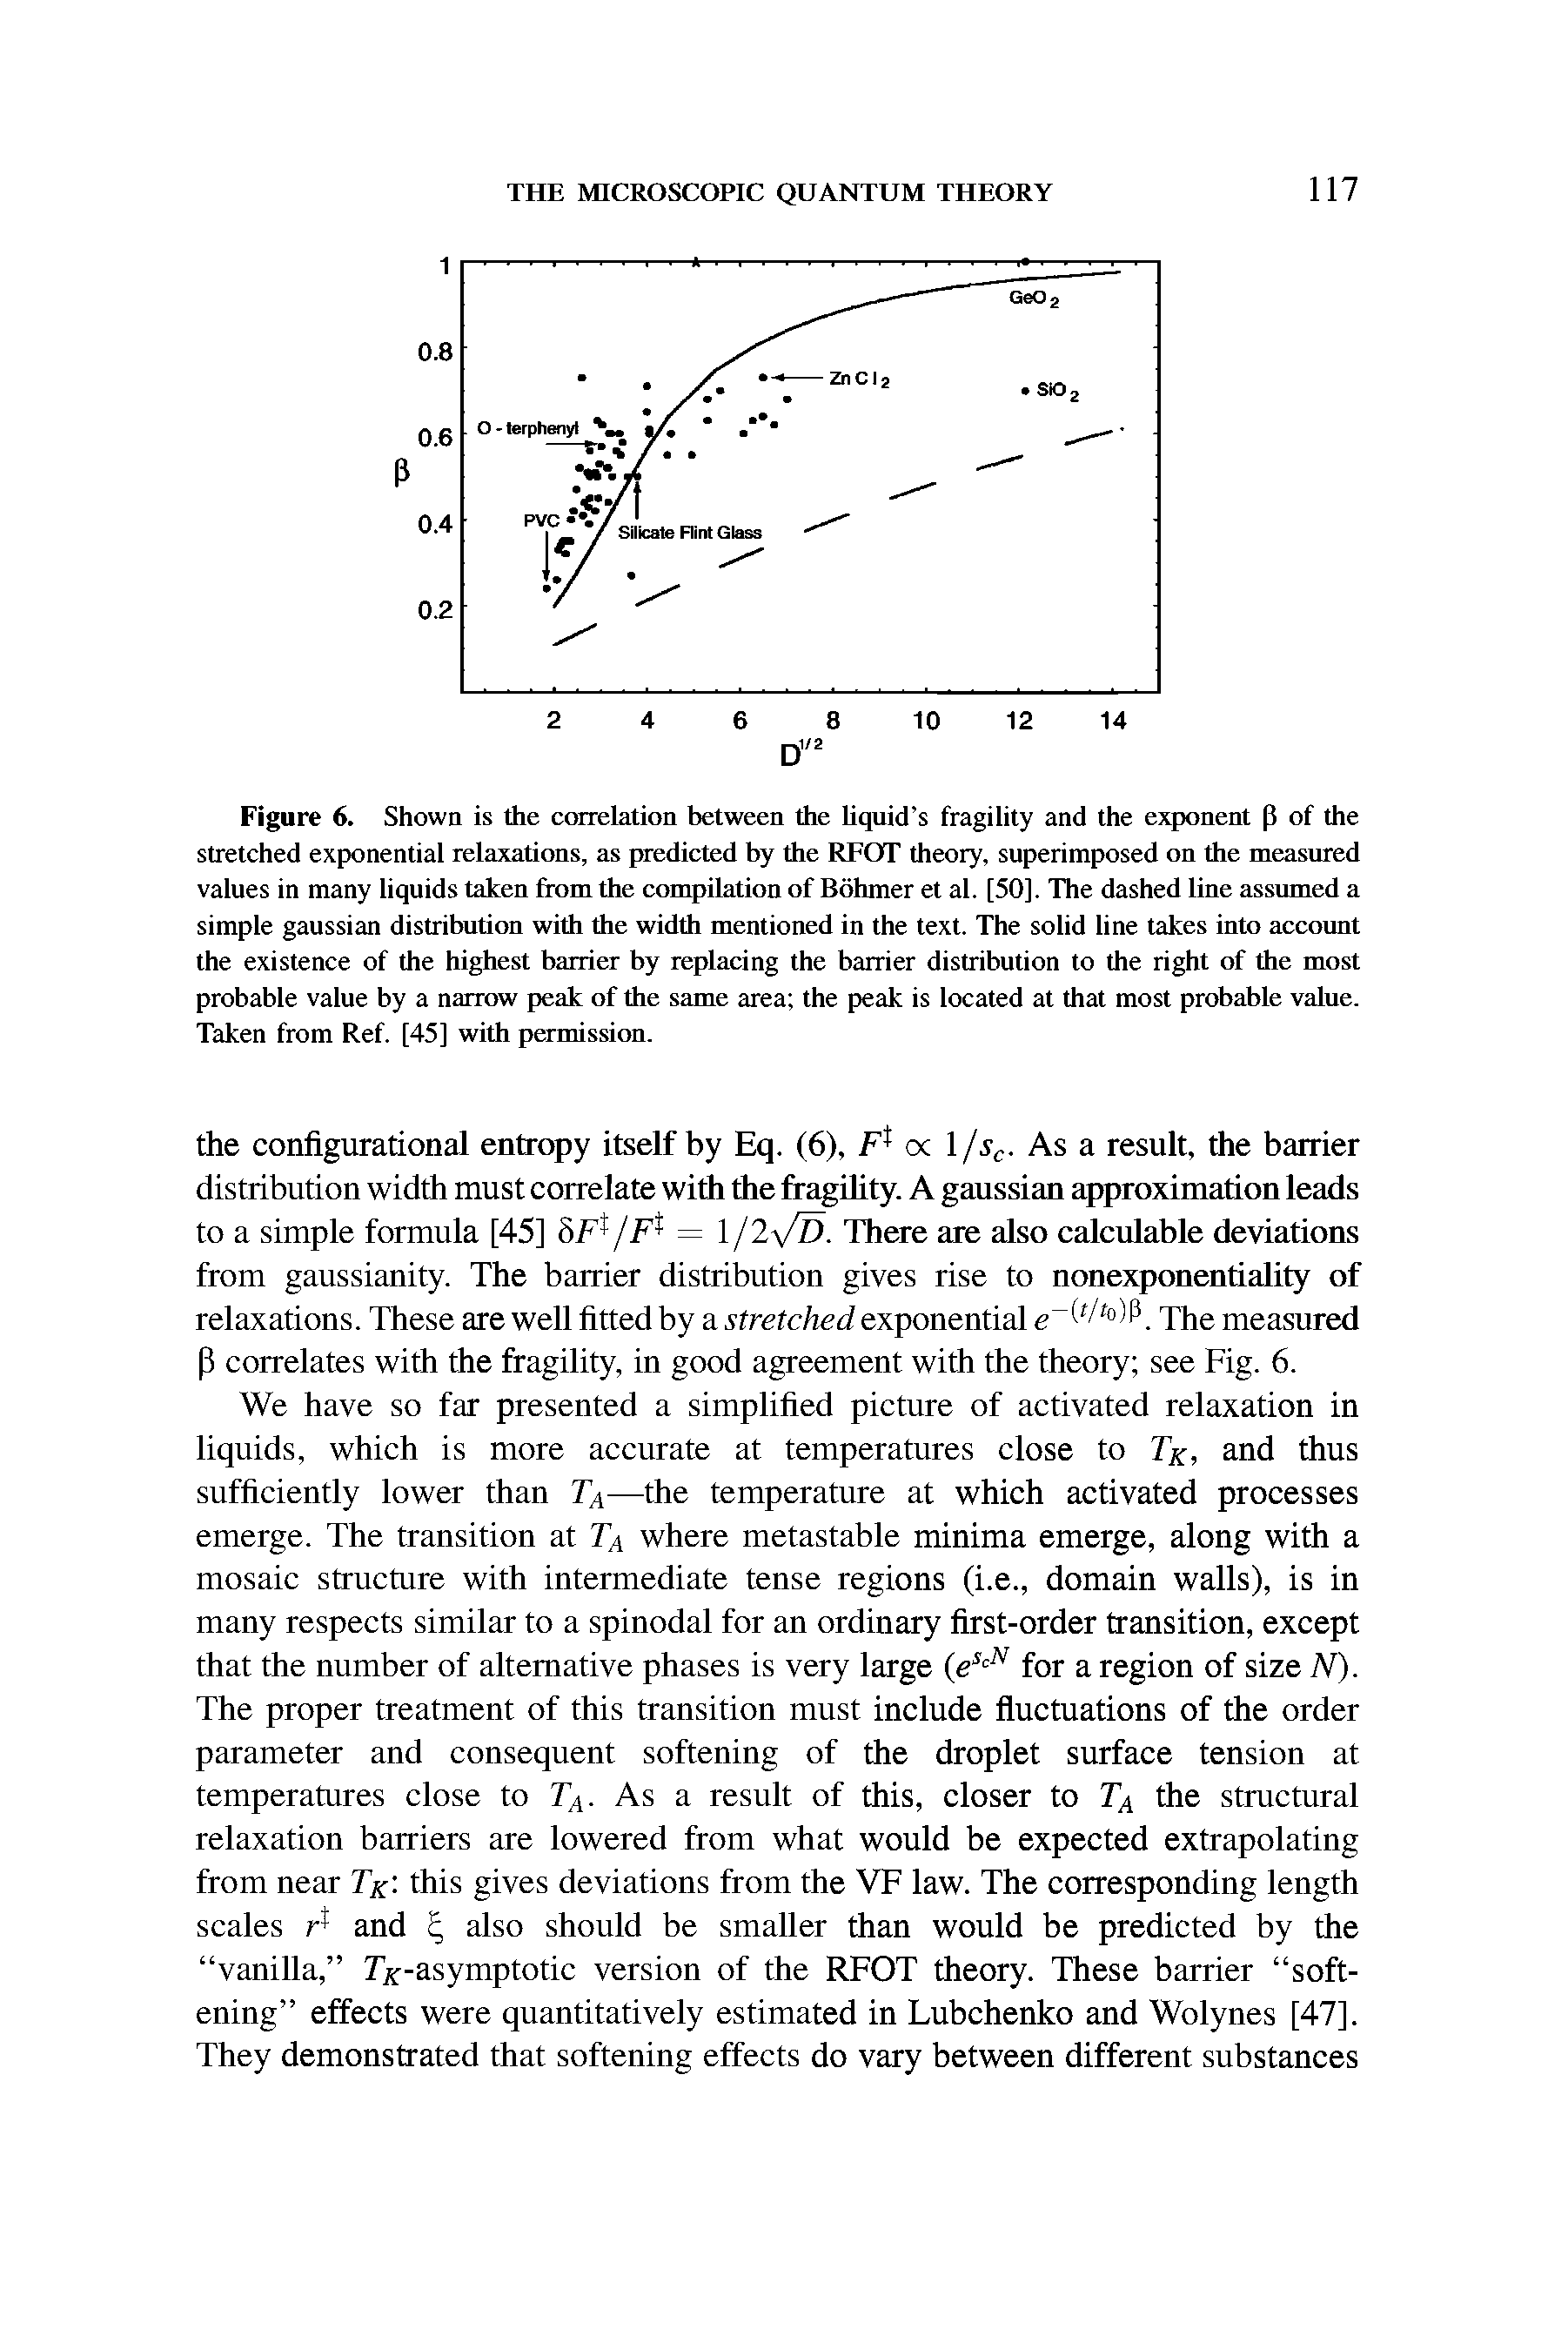 Figure 6. Shown is the correlation between the liquid s fragility and the exponent p of the stretched exponential relaxations, as predicted by the RFOT theory, superimposed on the measured values in many liquids taken from the compilation of Bohmer et al. [50]. The dashed line assumed a simple gaussian distribution with the width mentioned in the text. The solid line takes into account the existence of the highest barrier by replacing the barrier distribution to the right of the most probable value by a narrow peak of the same area the peak is located at that most probable value. Taken from Ref. [45] with permission.